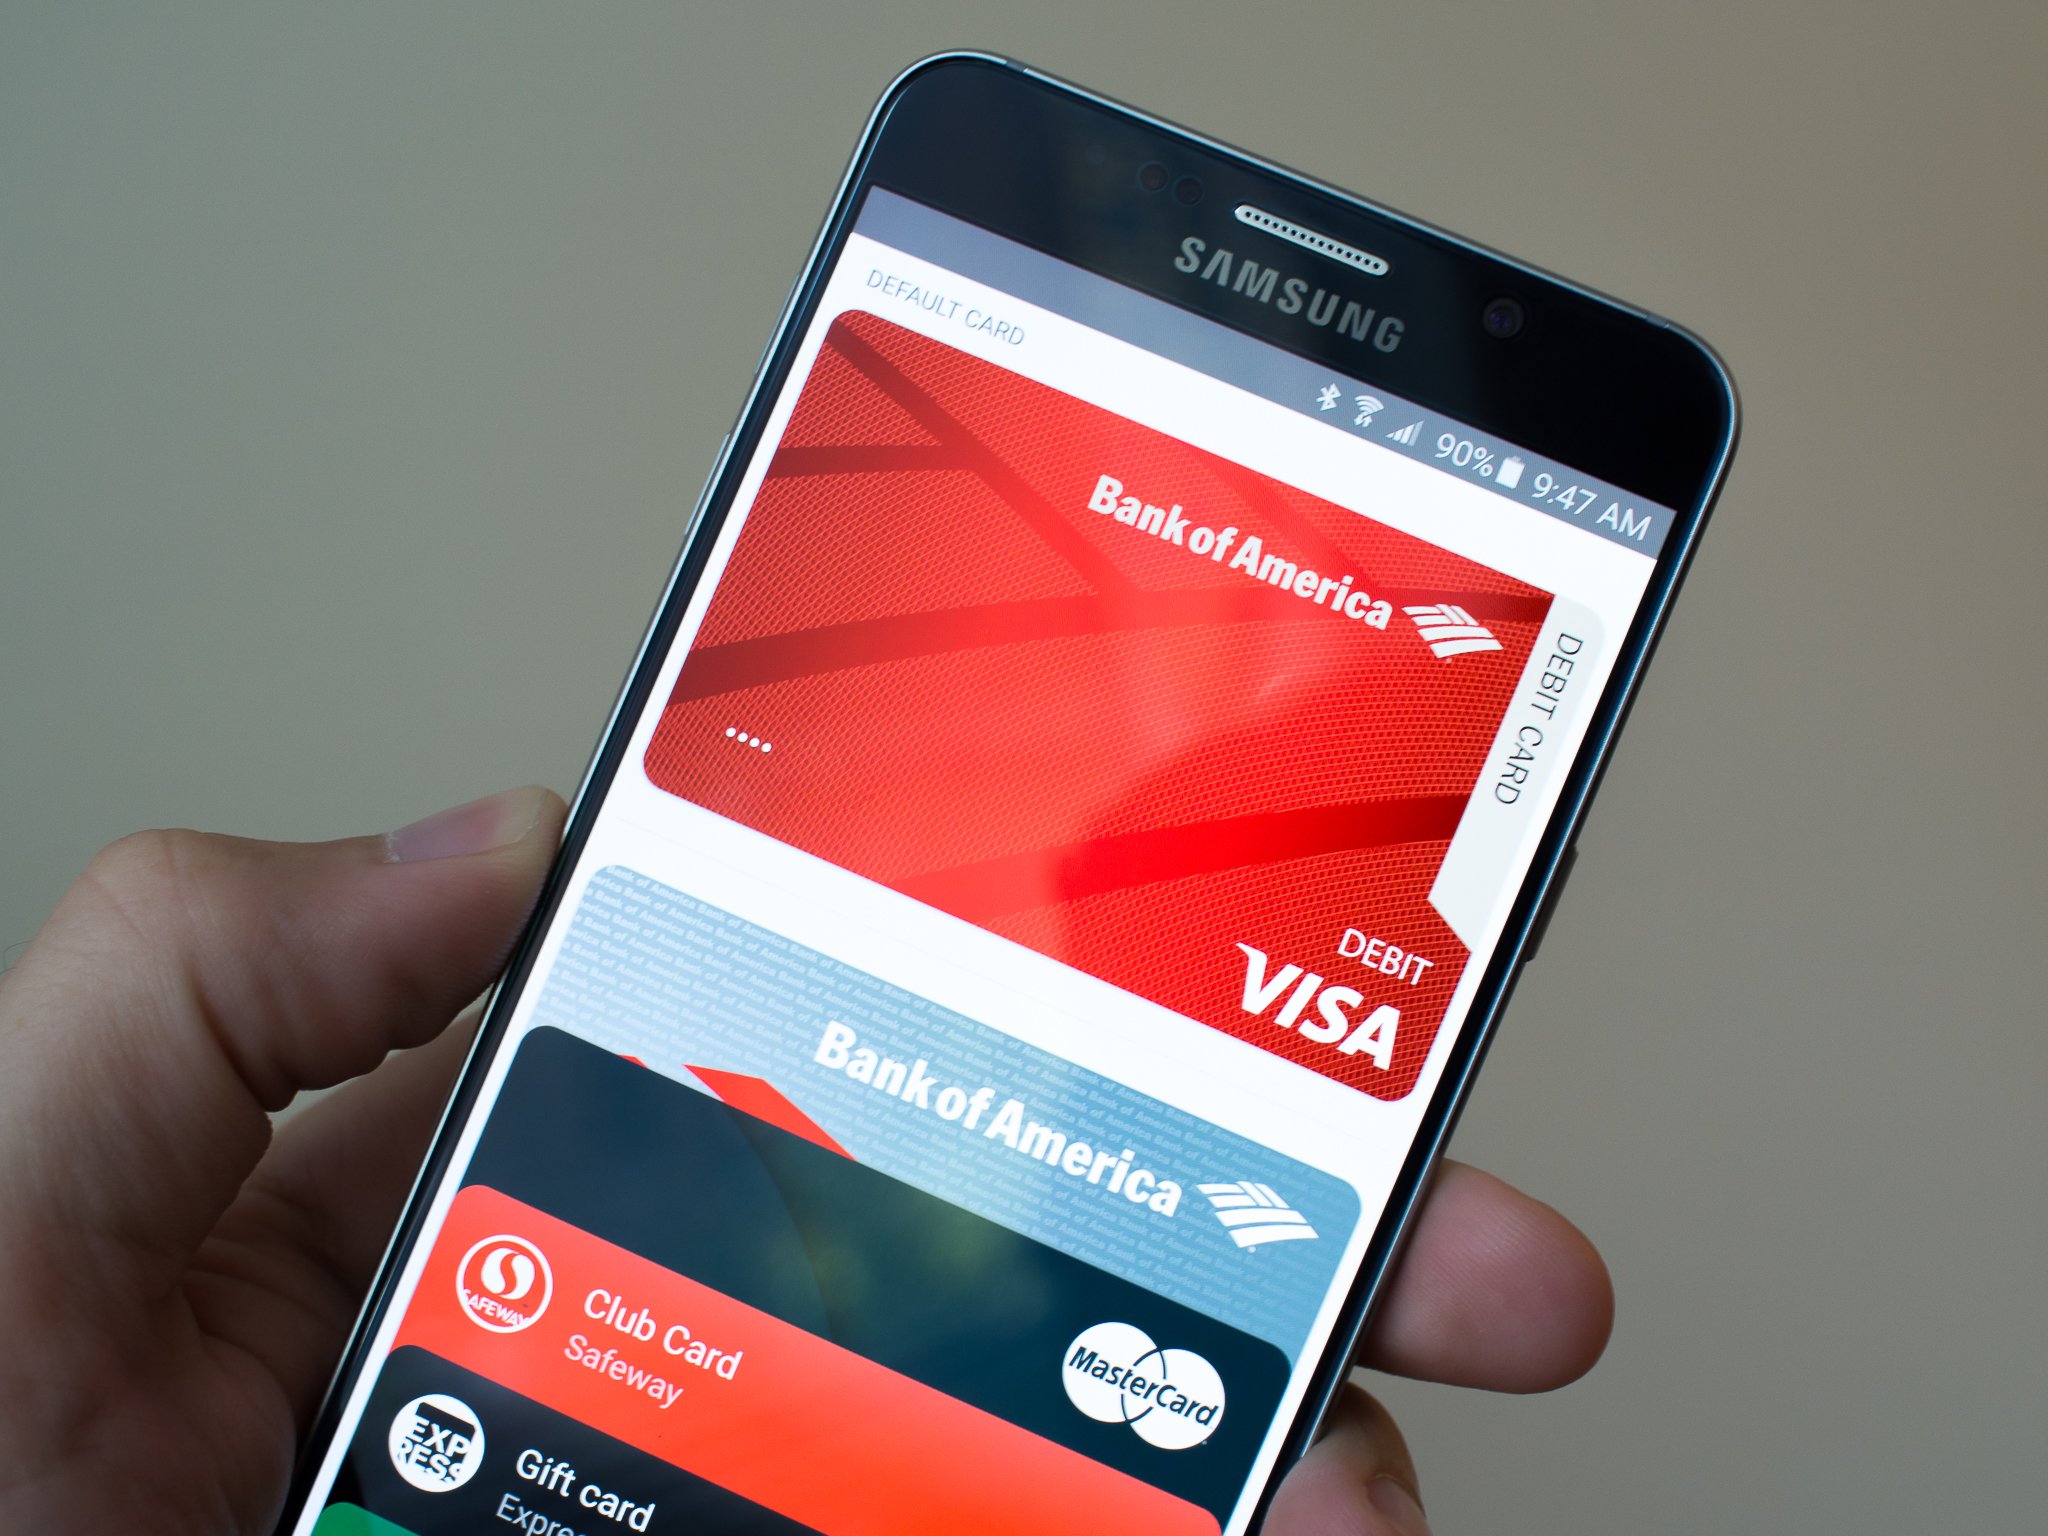 KFC begins rolling out Android Pay and Samsung Pay support to its restaurants